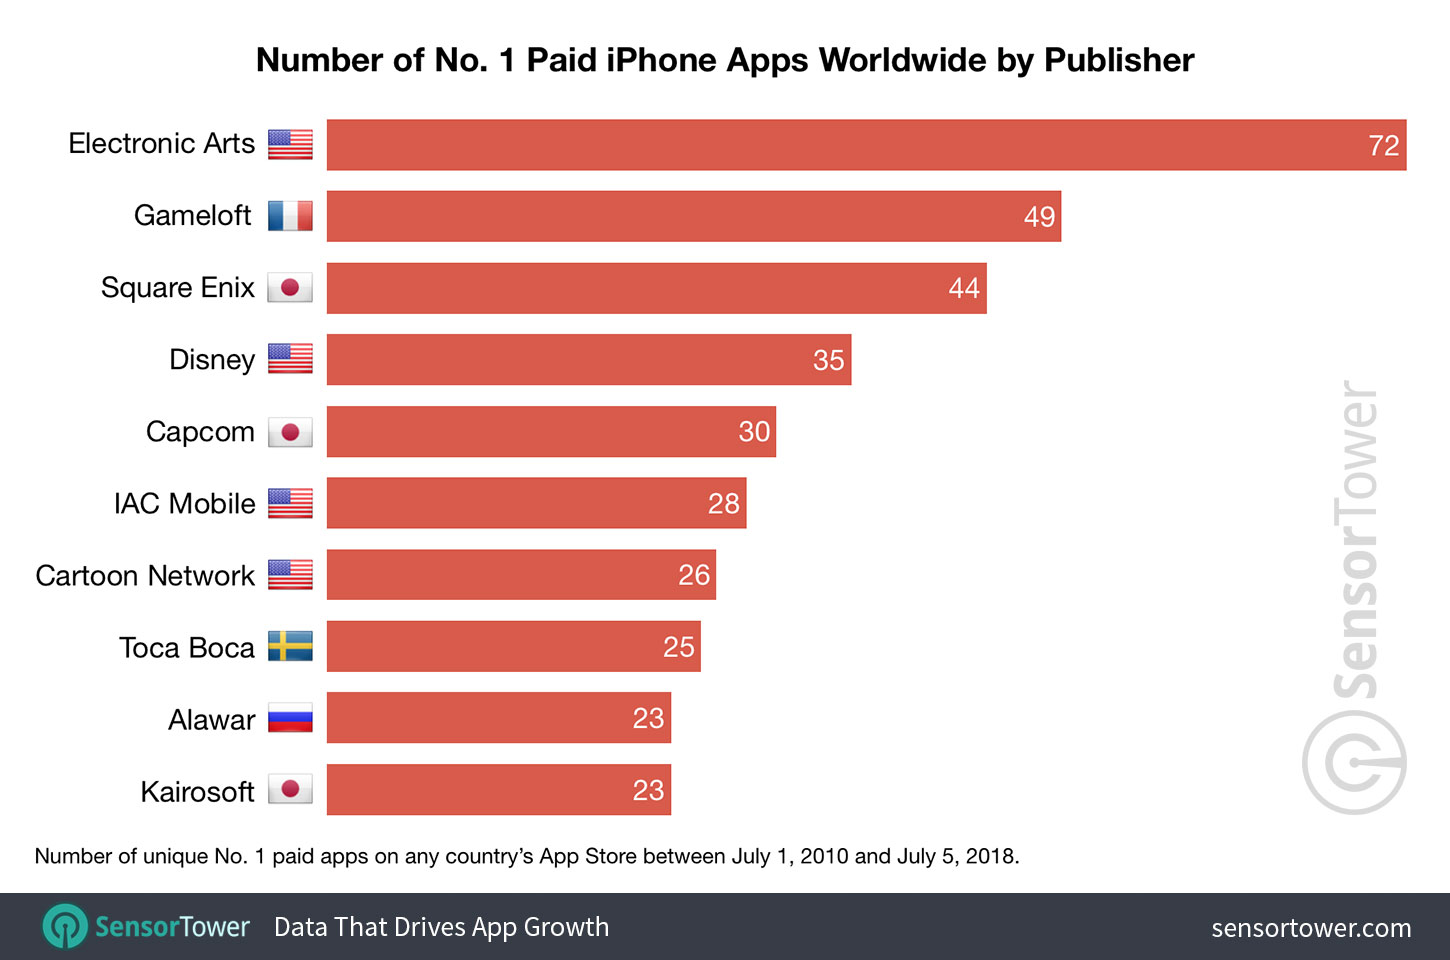 Chart showing a ranking of publishers by number of apps that reached No. 1 paid on iPhone on the Worldwide App Store